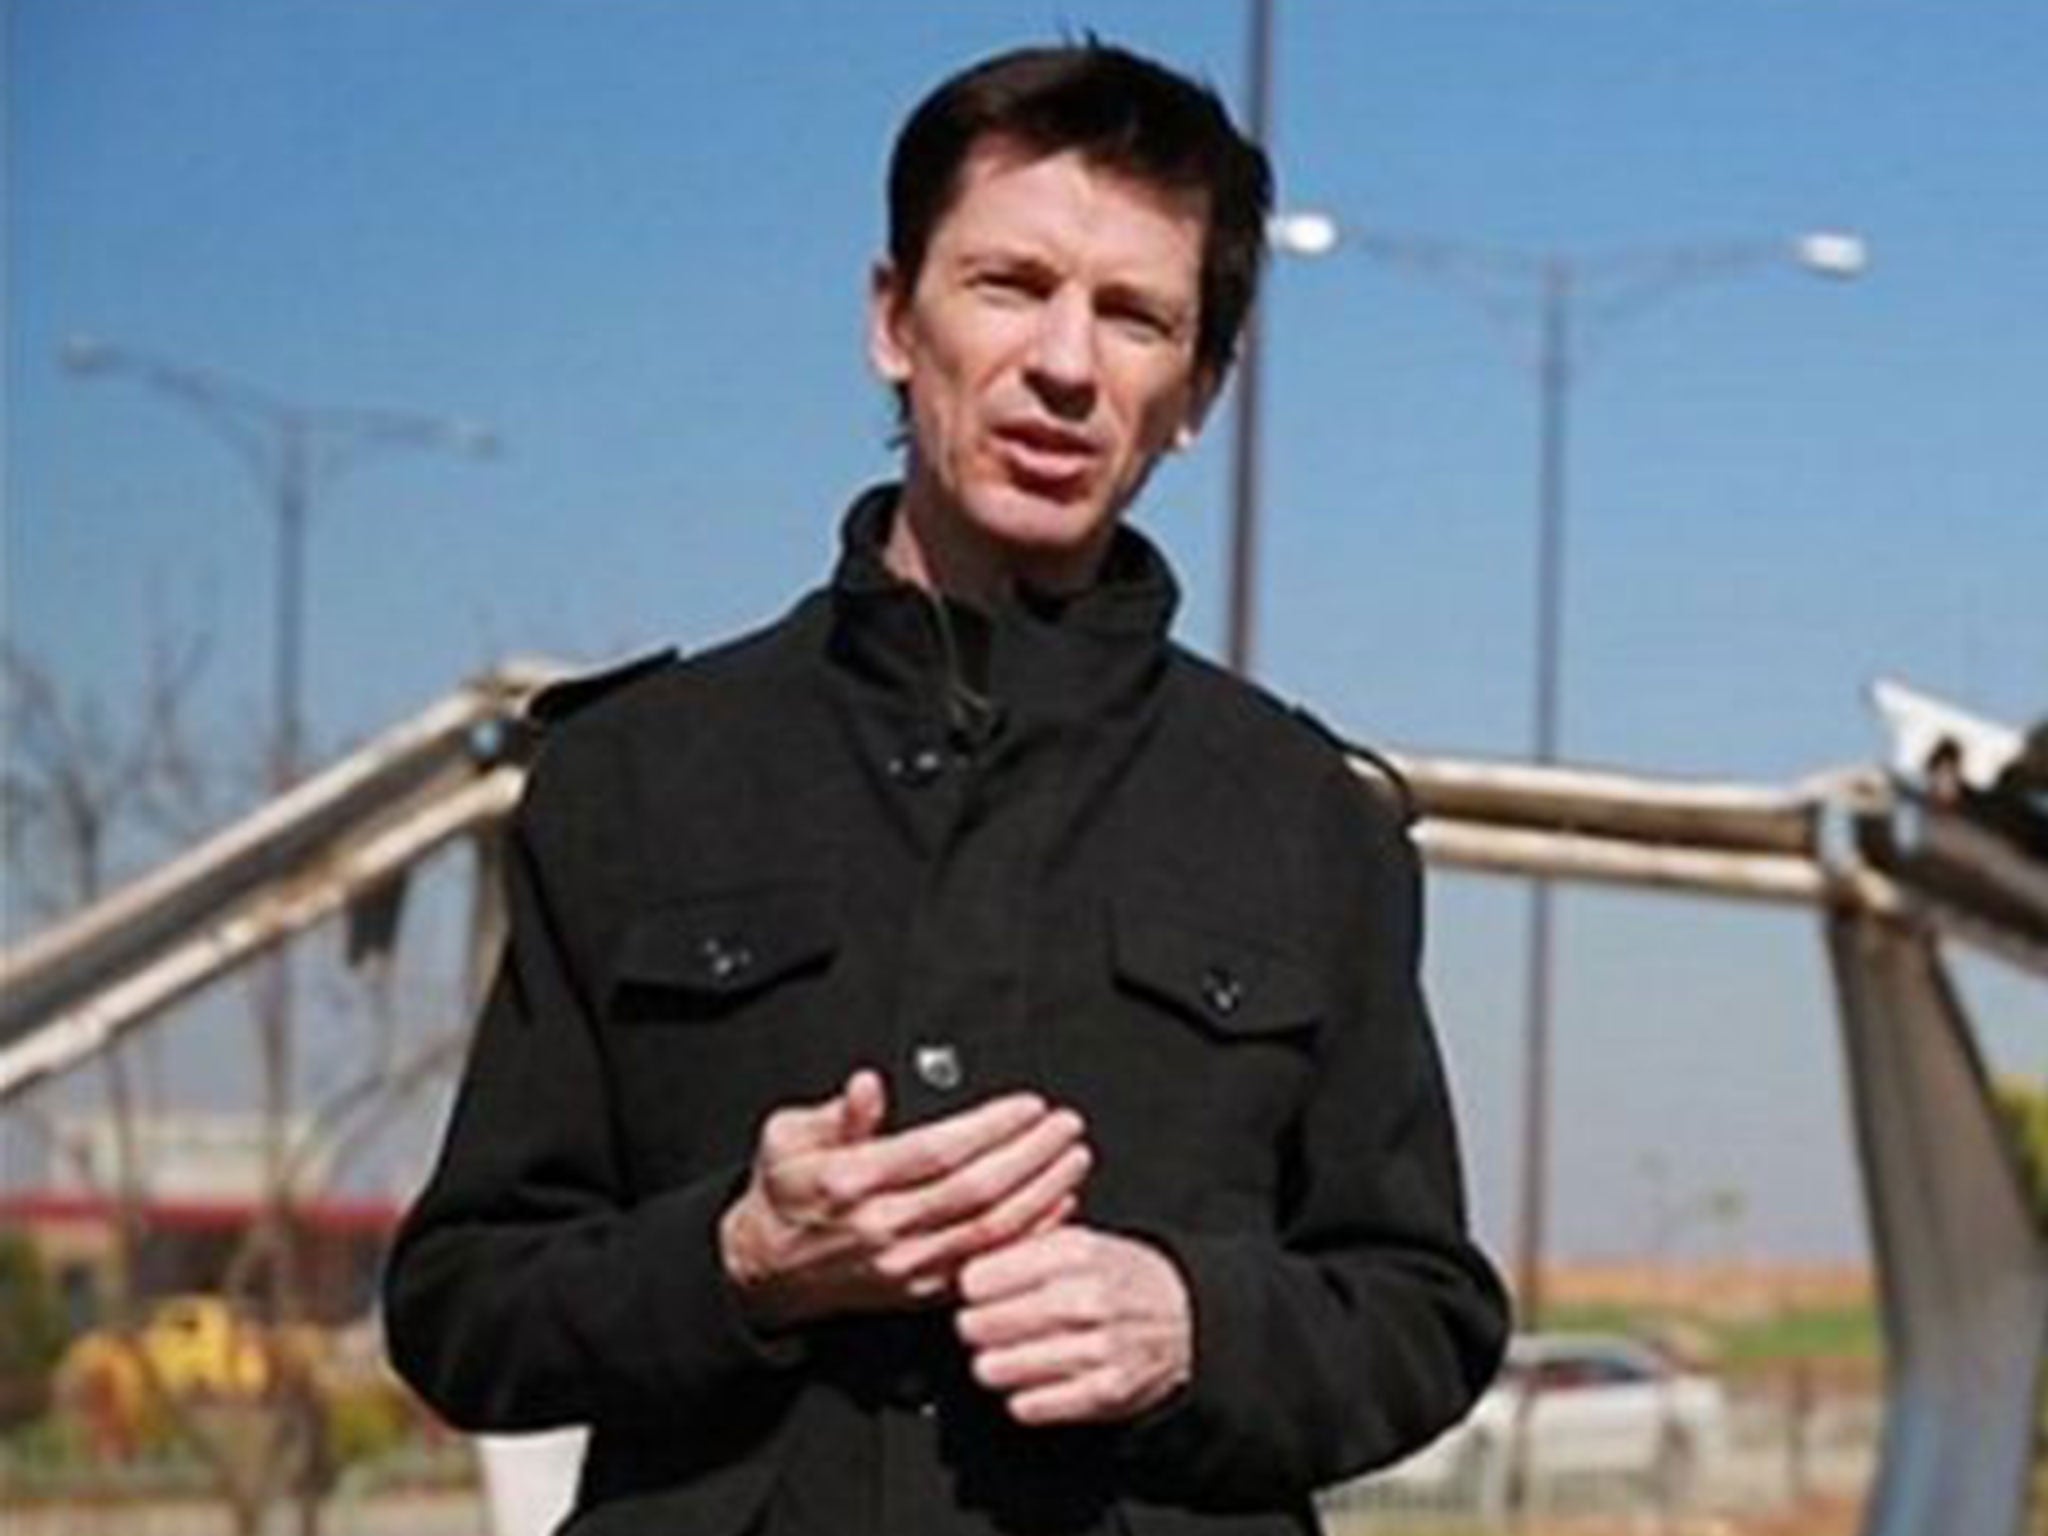 British journalist John Cantlie has not appeared in Isis propaganda videos since the battle of Mosul